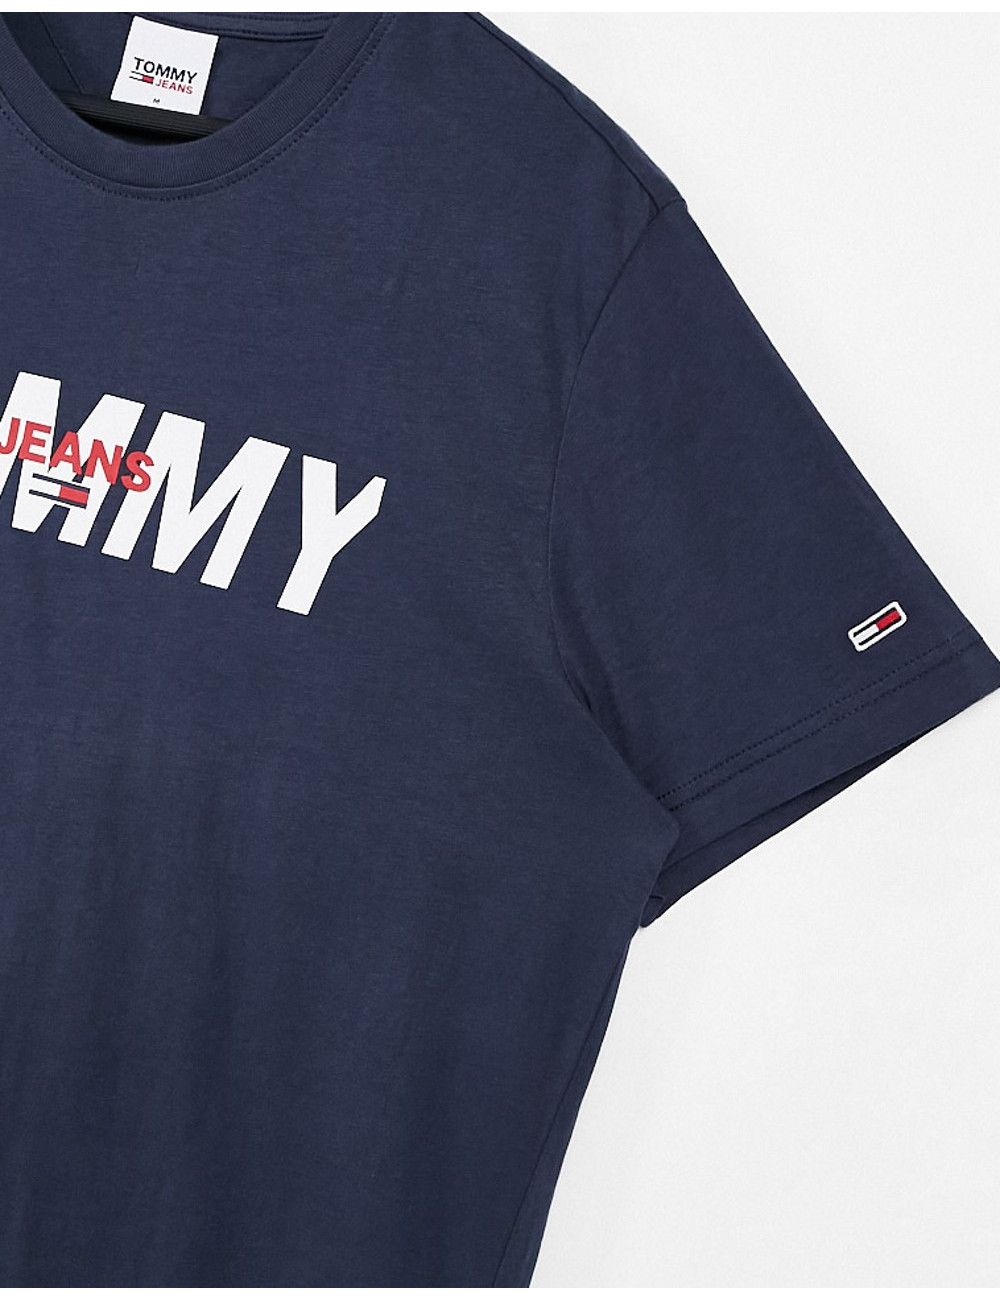 Tommy Jeans layered logo...